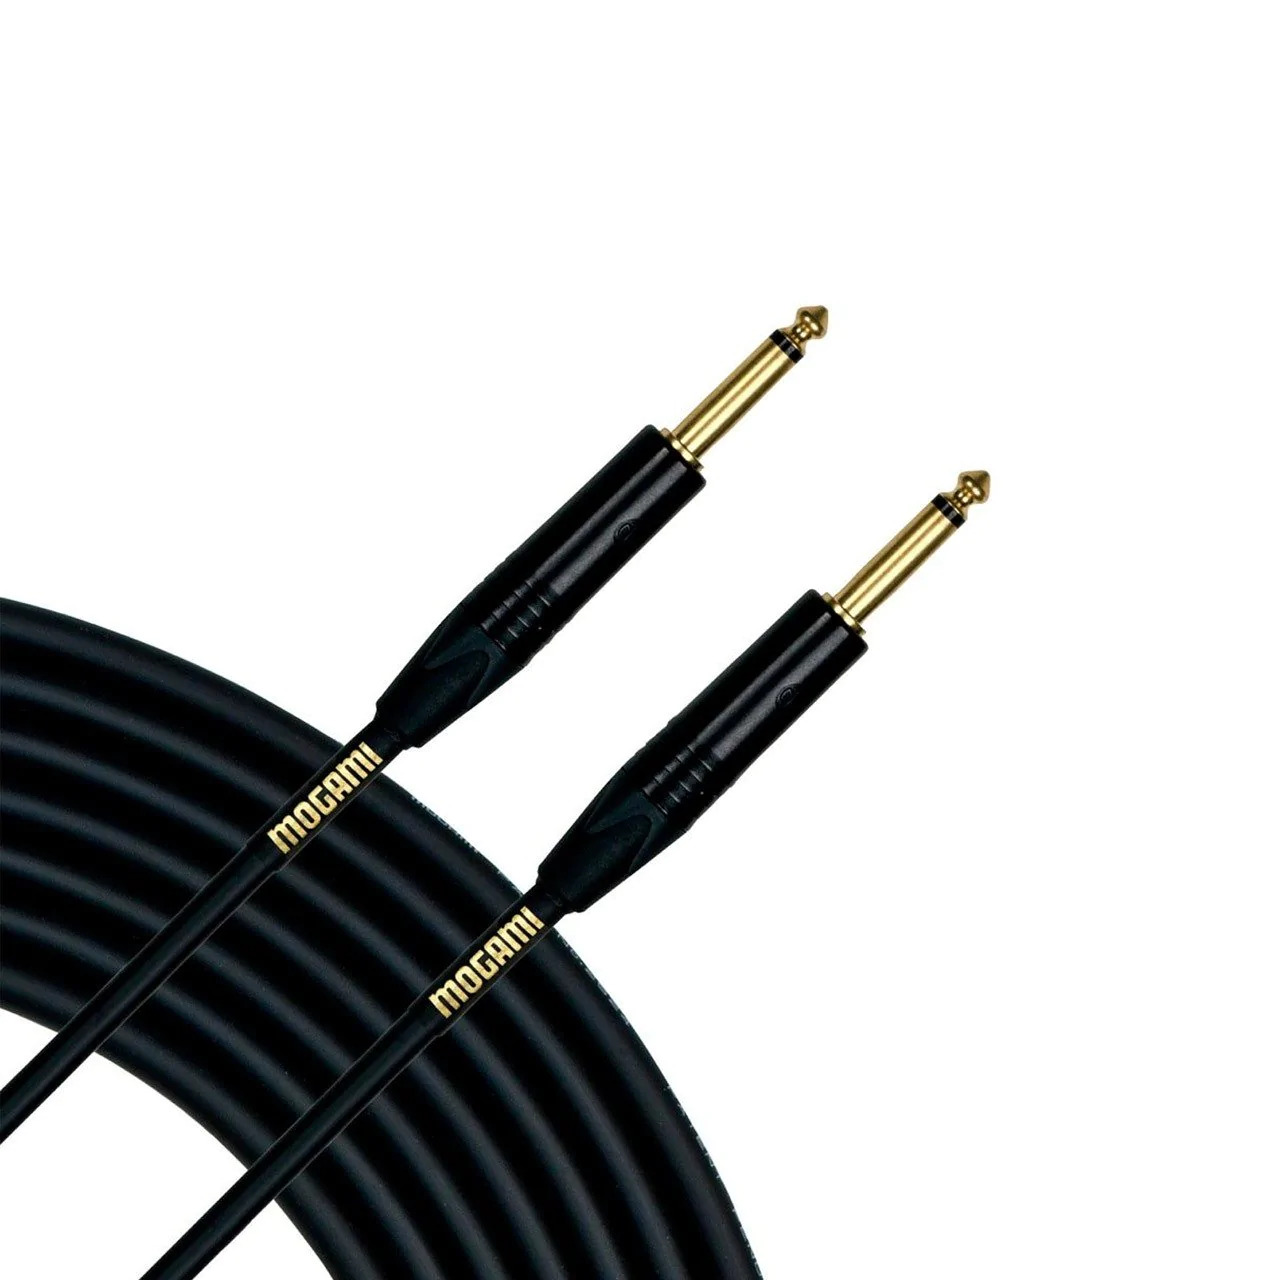 Mogami Gold Instrument 18 Foot Cable With Silent Plug for sale online